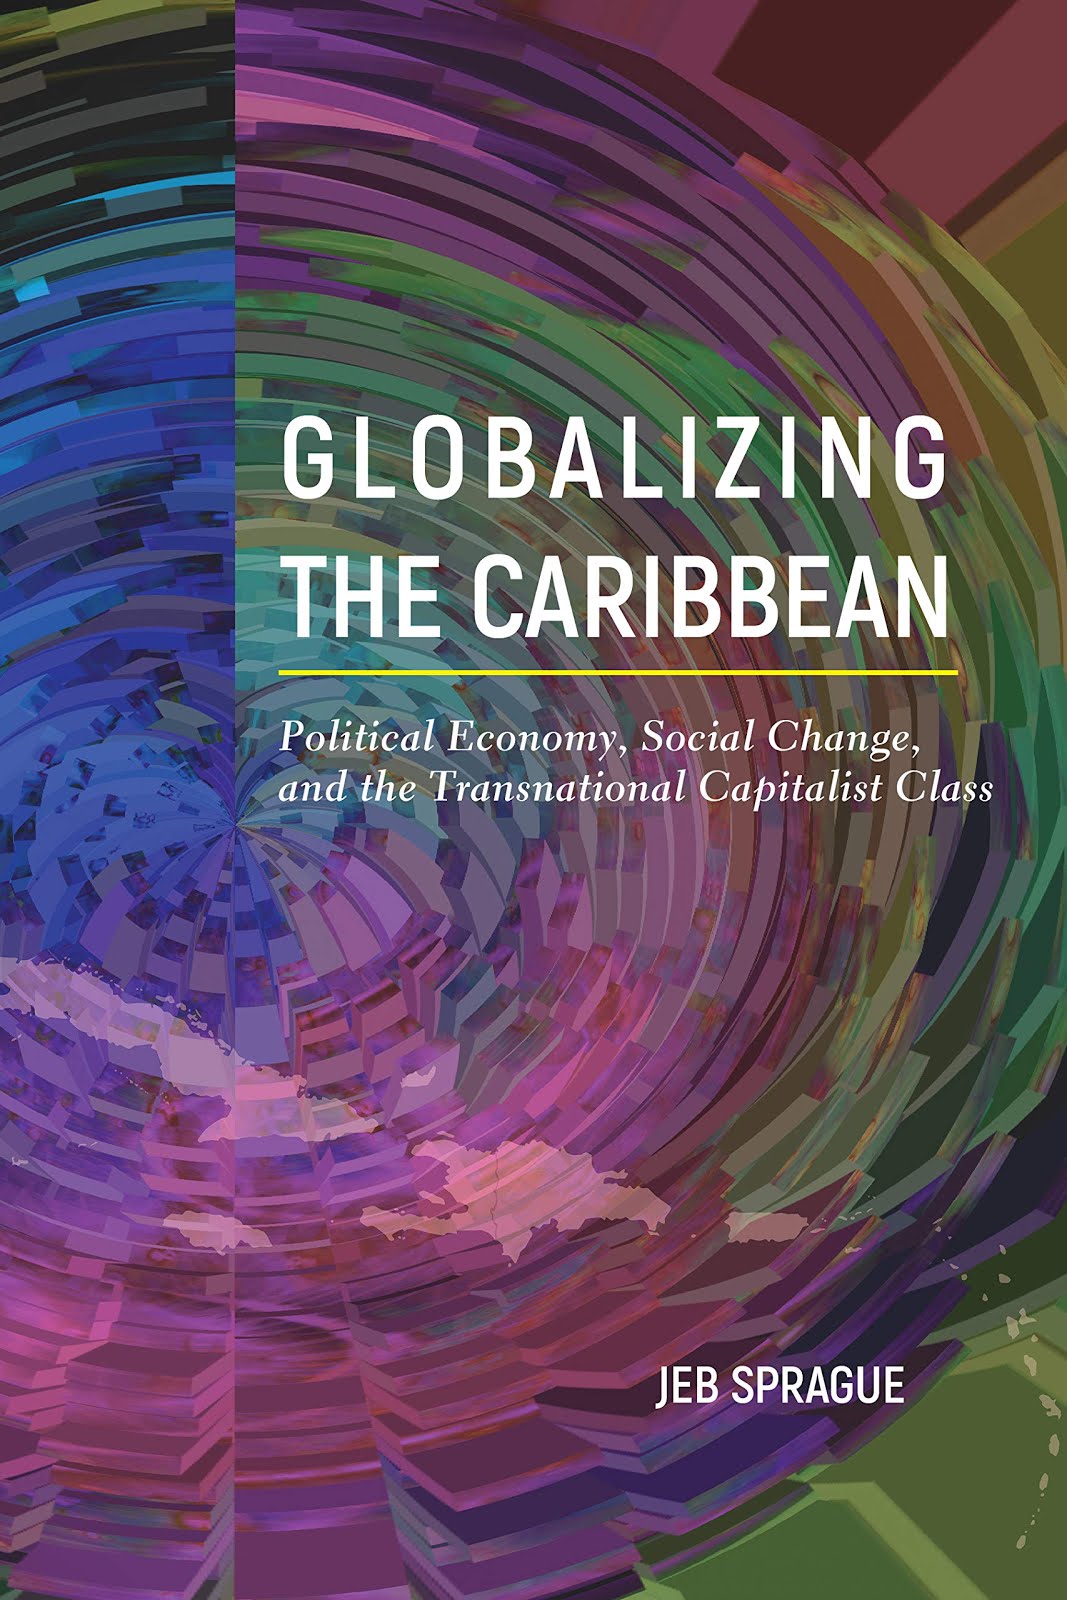 Globalizing the Caribbean: Political Economy, Social Change, and the Transnational Capitalist Class